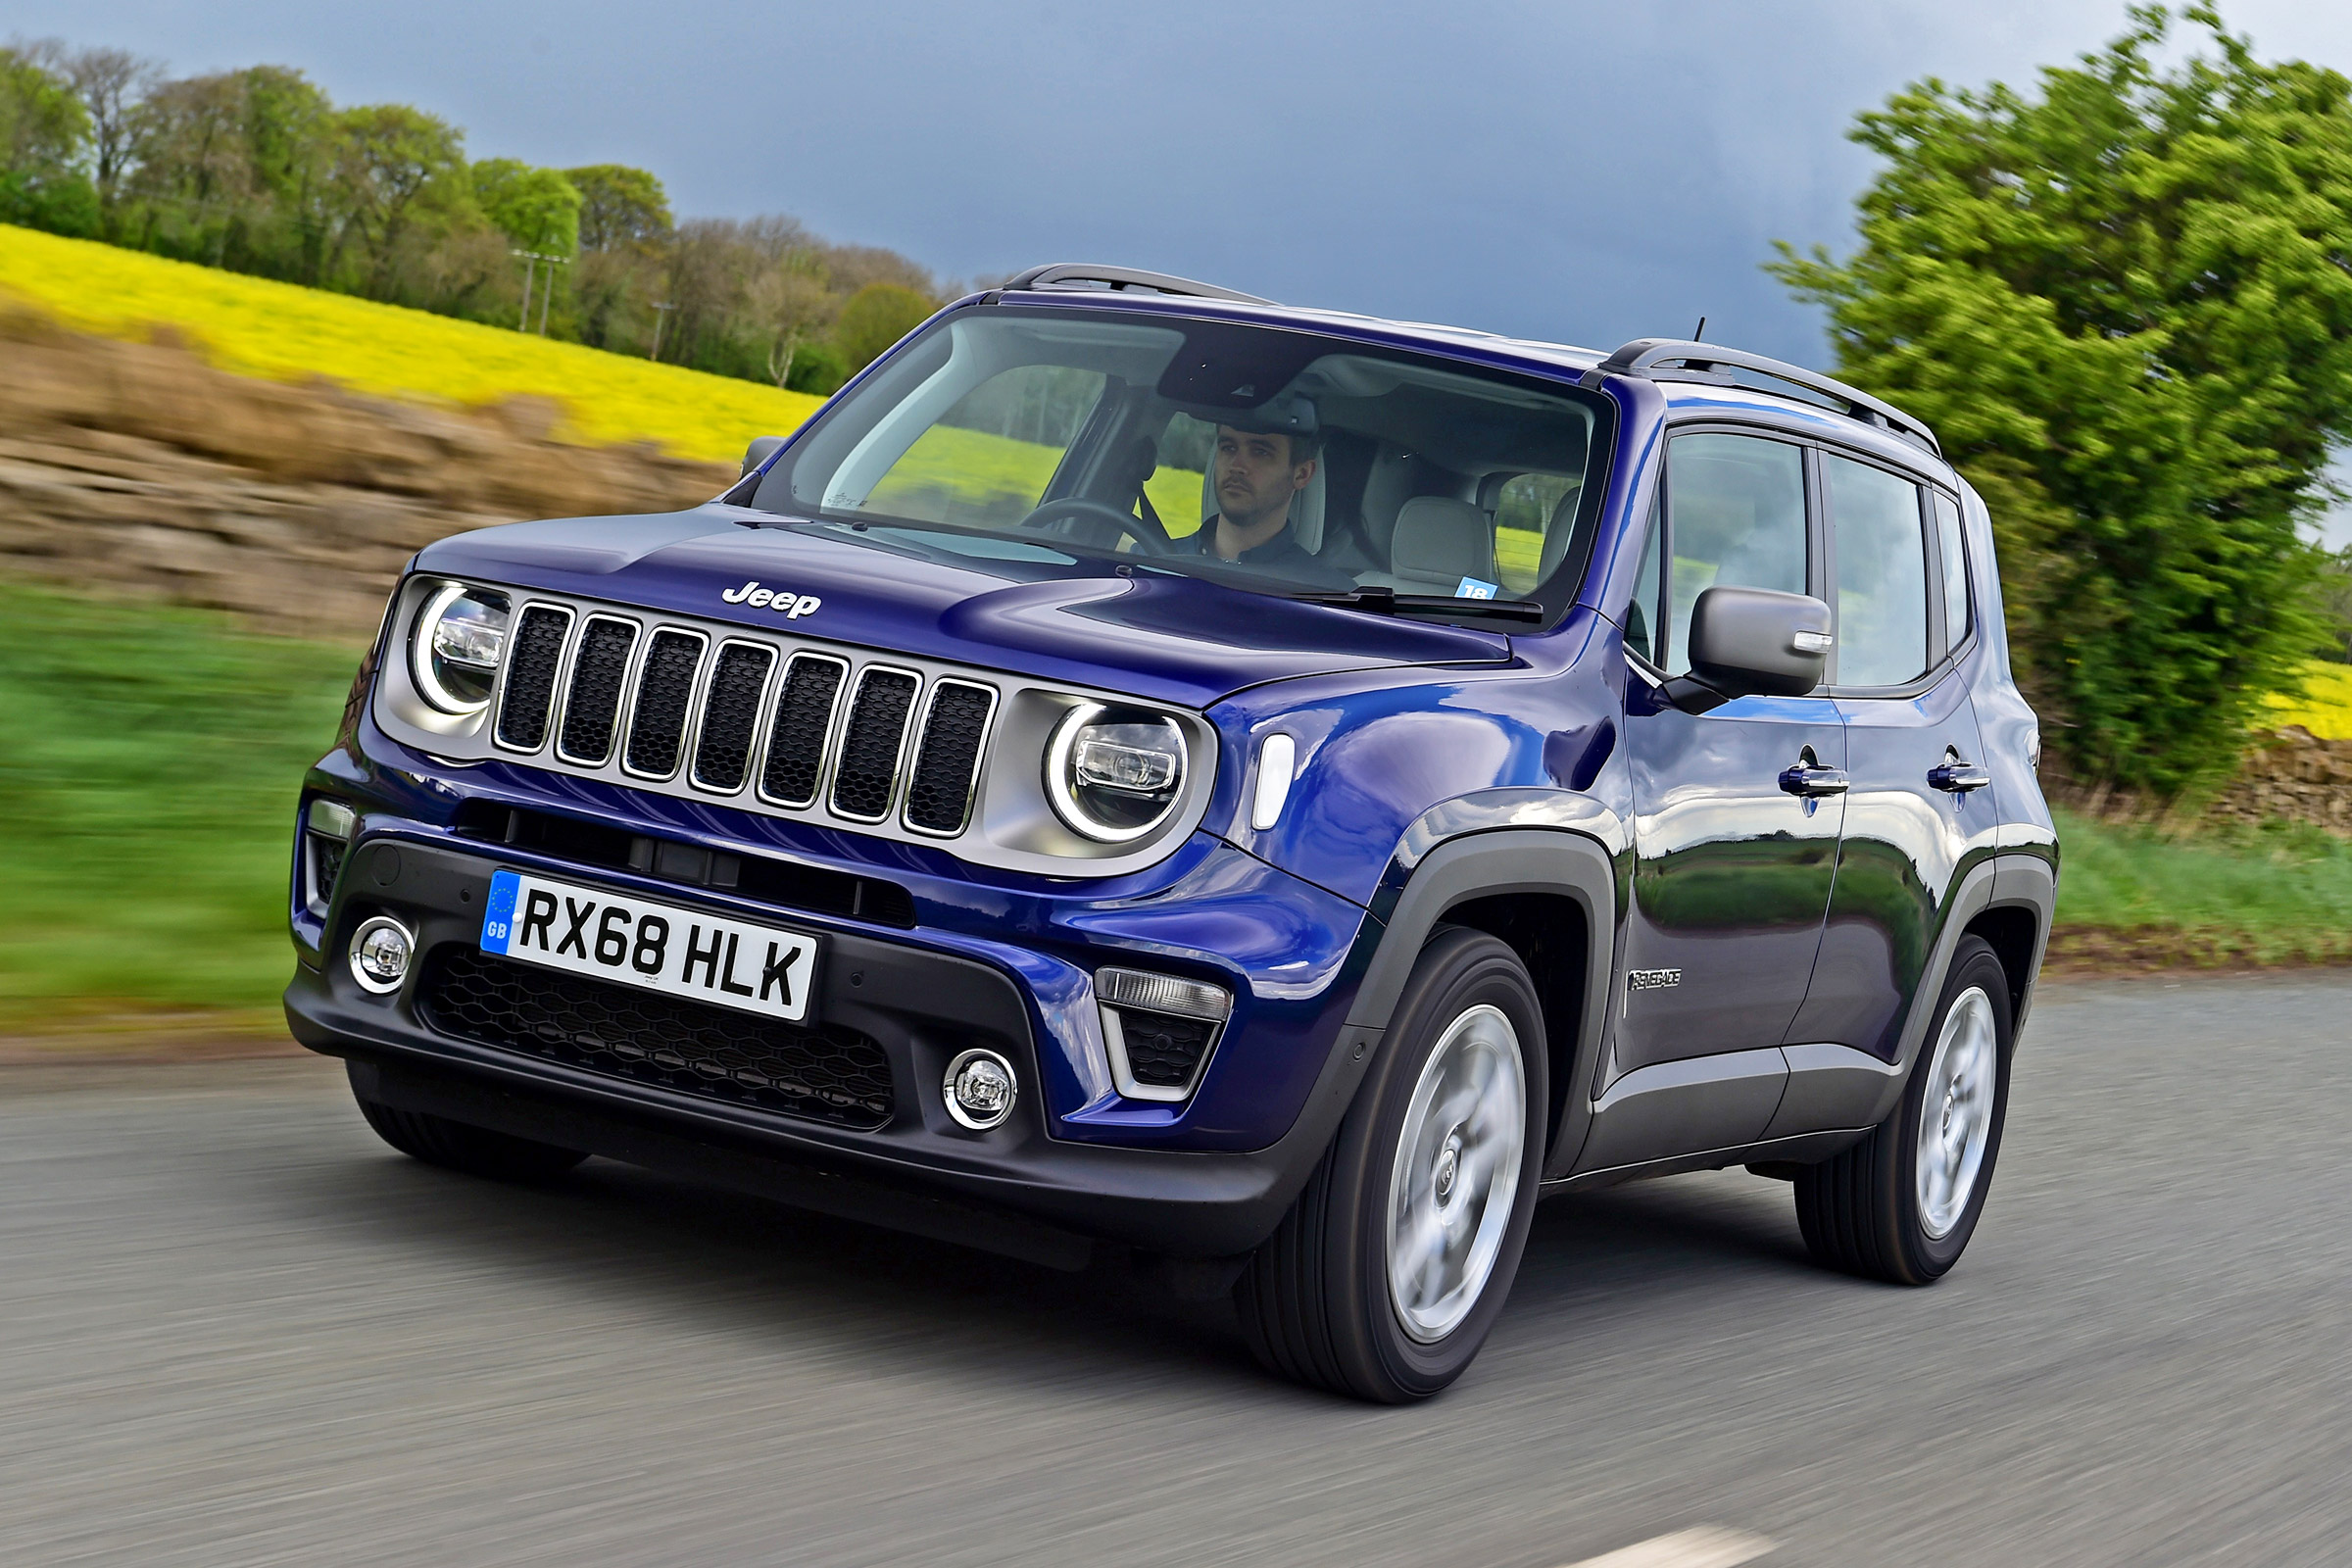 https://mediacloud.carbuyer.co.uk/image/private/s--SgPg7yl2--/v1579644804/carbuyer/2019/05/jeep_renegade_front_driving.jpg